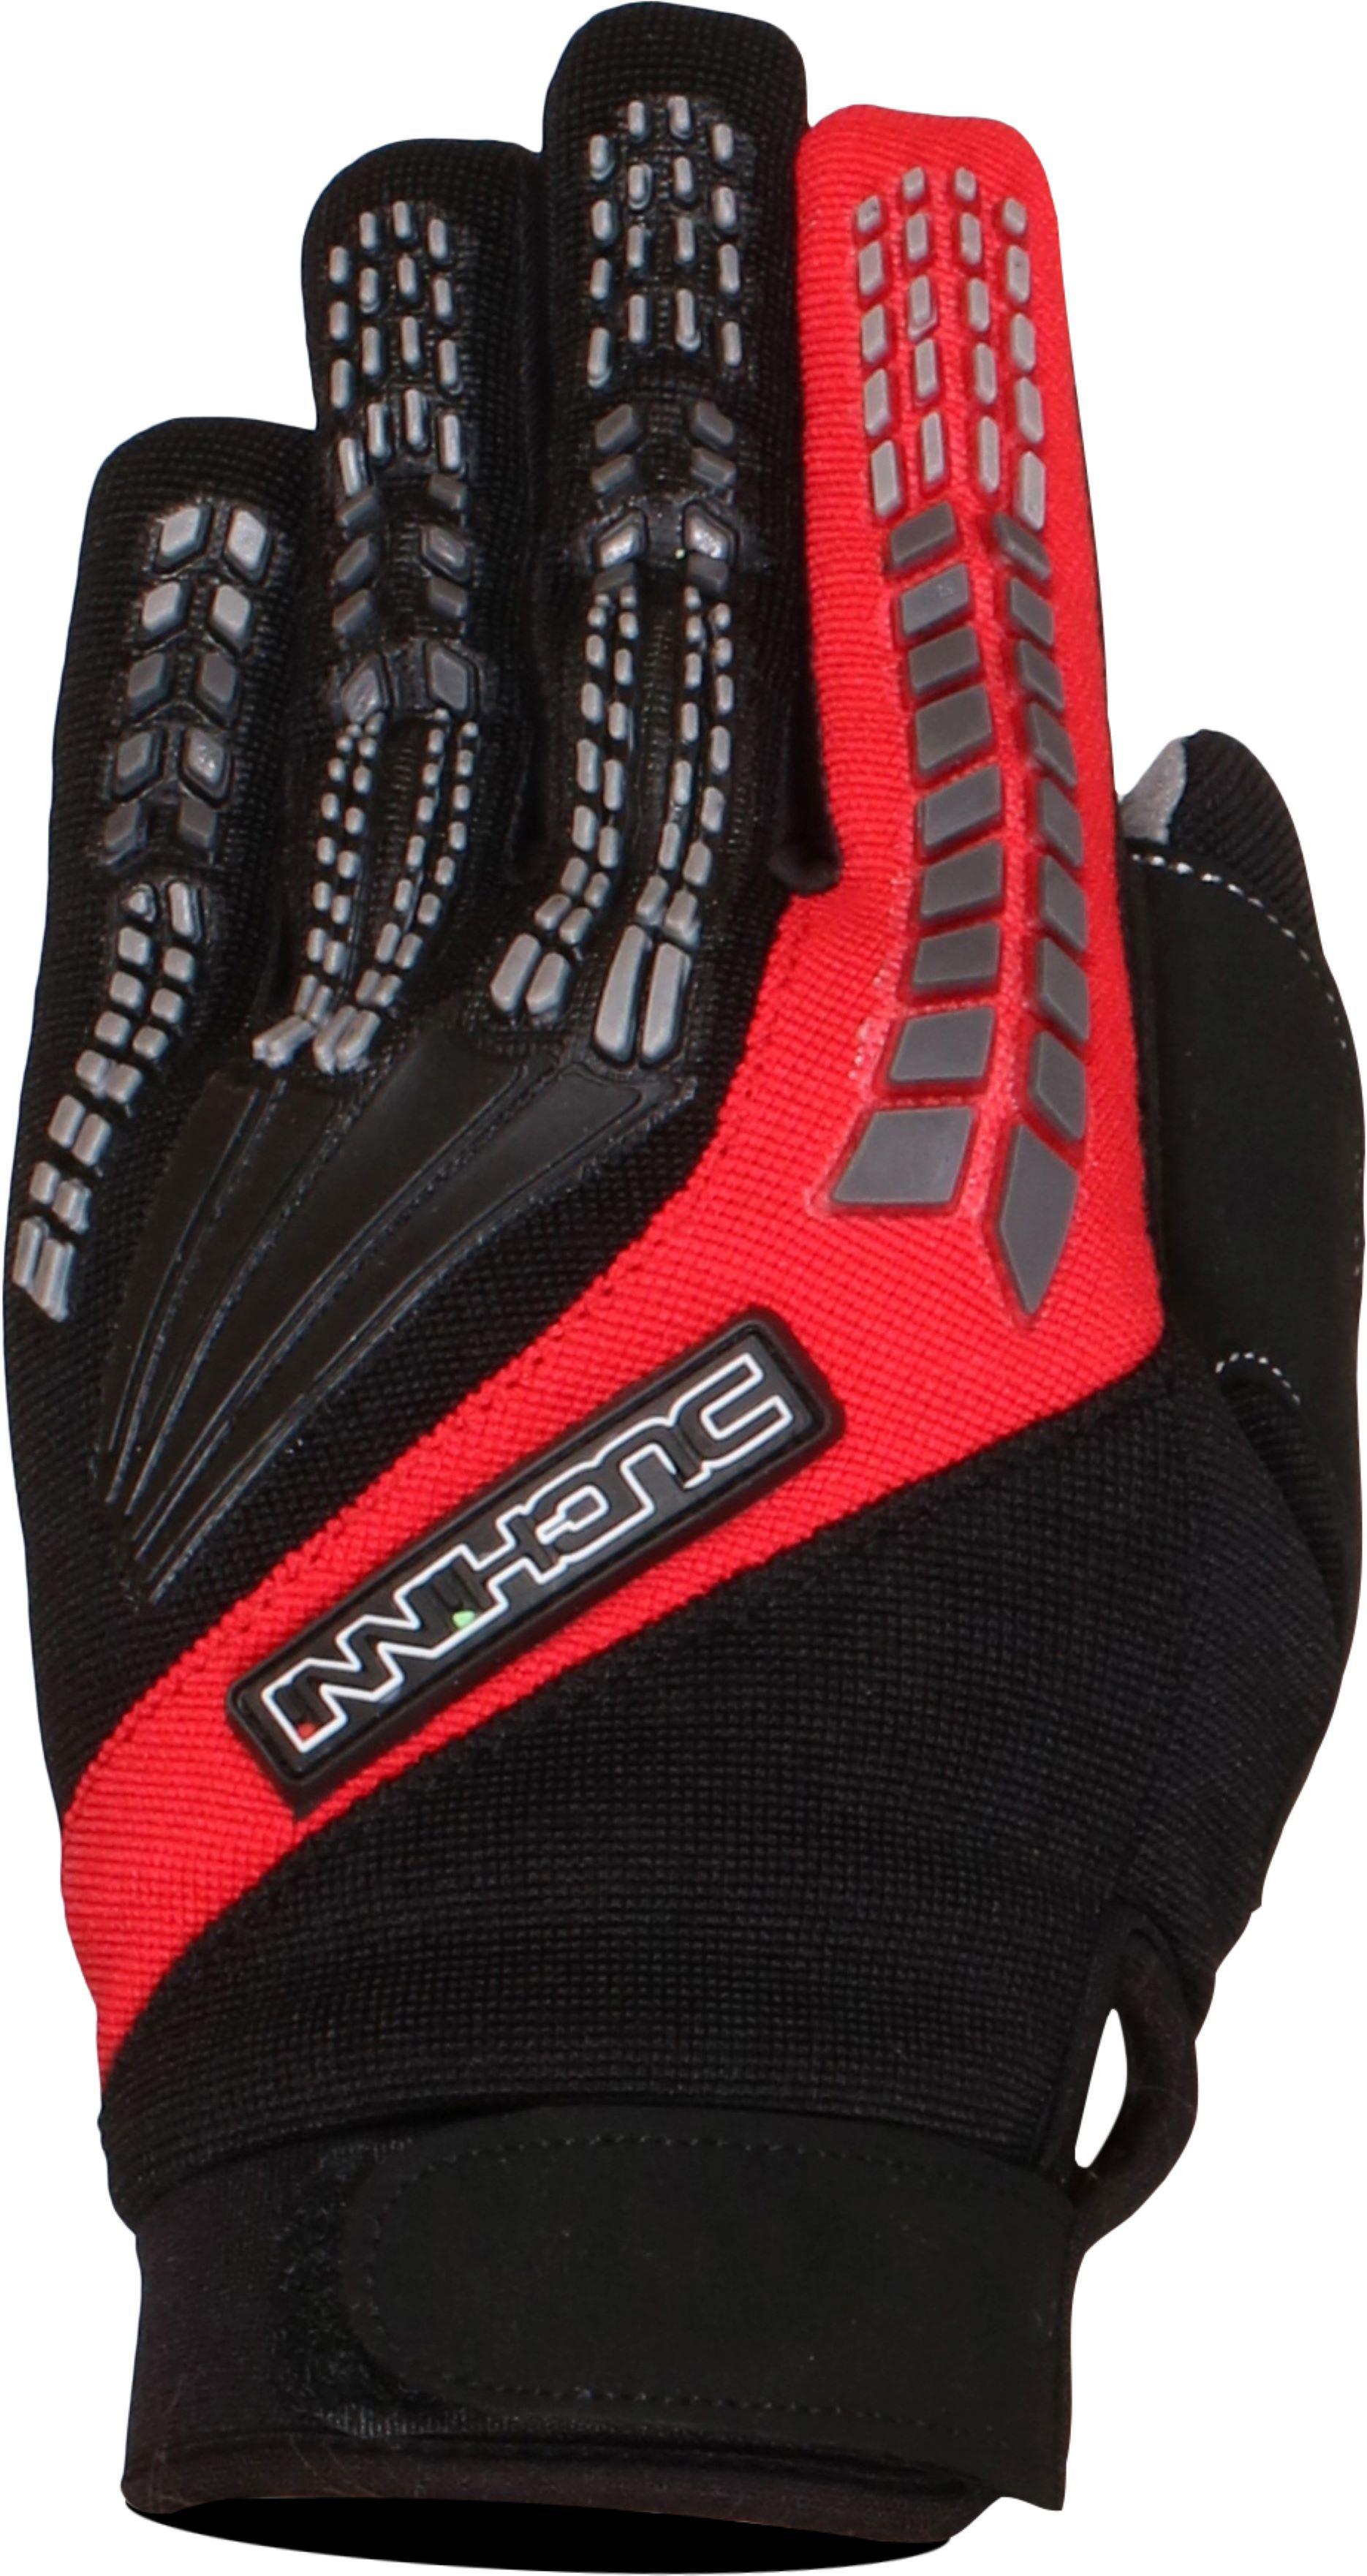 Duchinni Focus Motorcycle Gloves - Black And Red, S